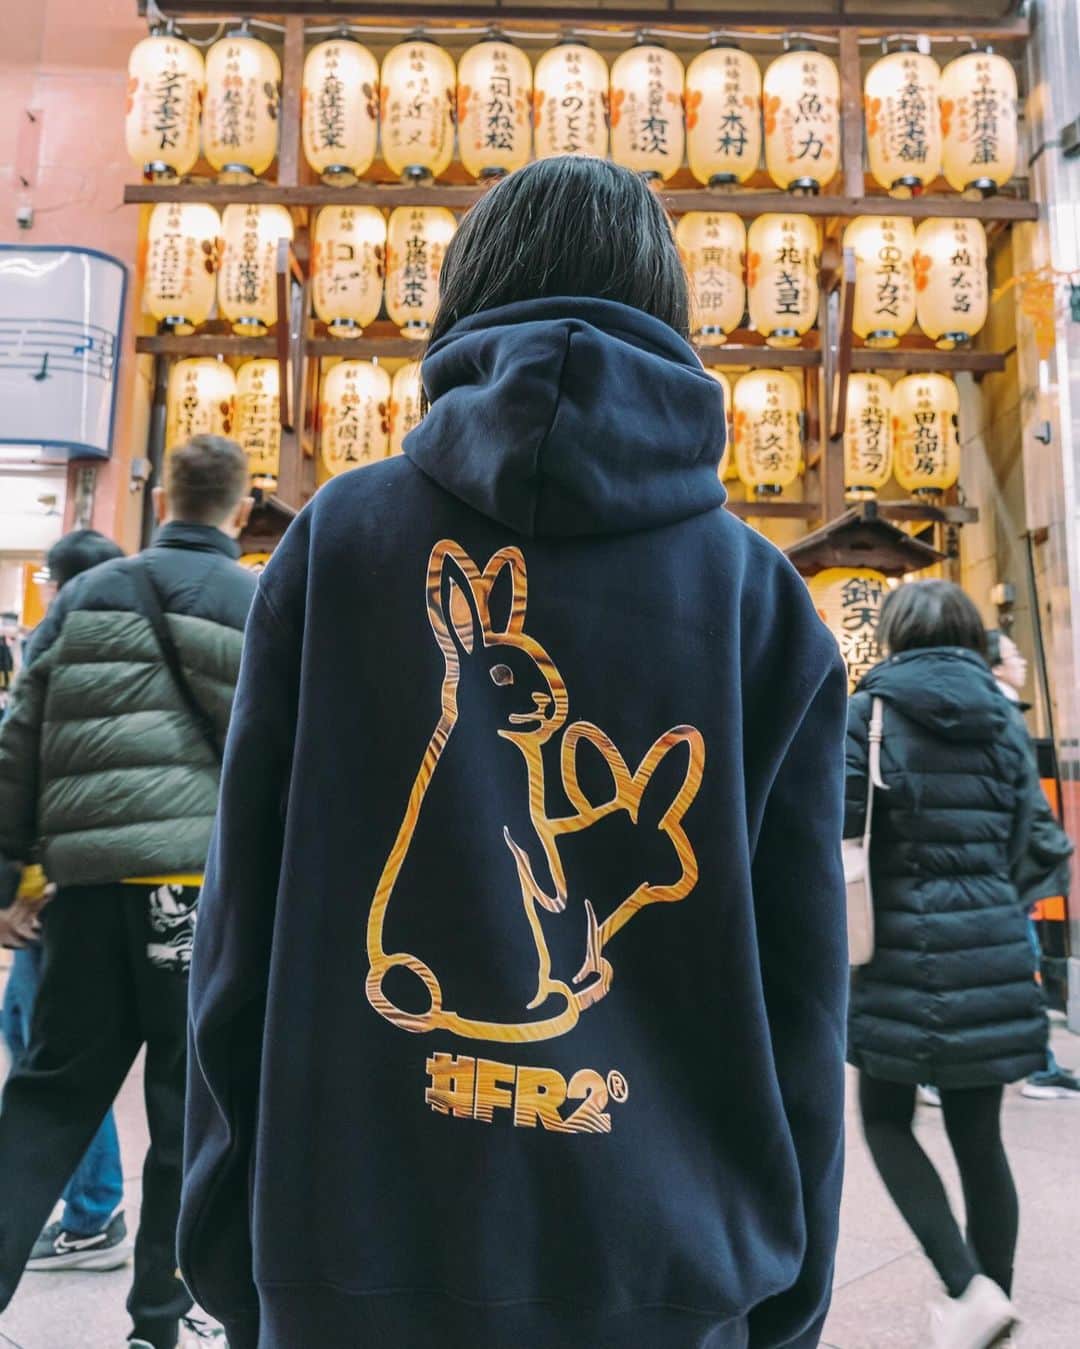 #FR2さんのインスタグラム写真 - (#FR2Instagram)「We are excited to announce the grand opening of #FR2 KYOTO on November 30, 2023 (Thur.). At #FR2 KYOTO, we will also feature some of #FR2UME items as well.  To celebrate our grand opening, limited-edition items as follows will be released:  Smoking Kills Hoodie (Kyoto limited) Rabbits Icon Logo Hoodie (Kyoto limited) NSS Kyoto Only Hoodie (Ume)  Icon Logo Kyoto Only Hoodie (Ume)  *Please note that we may limit the maximum quantity per purchase. *These limited items will only be available at the #FR2 KYOTO store.  #FR2 KYOTO 503-18 Higashigawa-cho, Nakagyo-ku, Kyoto-shi, 604-8046 Kyoto Tel : 075-606-4577 Hours : 11:00 ~ 20:00  2023 / 11/ 30（Thu）に#FR2 KYOTOがオープン致します。 #FR2 KYOTOでは梅の一部商品も取り扱いします。  オープンを記念して下記の2型のリミテッドアイテムを発売します。  Smoking Kills Hoodie(Kyoto Only)  Rabbits Icon Logo Hoodie(Kyoto Only)  NSS Kyoto Only Hoodie(梅)   Icon Logo Kyoto Only Hoodie(梅)  ※販売は購入制限を設ける場合があります。 #FR2 KYOTO以外での発売はございません。  #FR2 KYOTO 〒604-8046 京都府京都市中京区東側町503-18 075-606-4577 11:00〜20:00  #FR2#fxxkingrabbits#頭狂色情兎#FR2KYOTO」11月27日 19時34分 - fxxkingrabbits